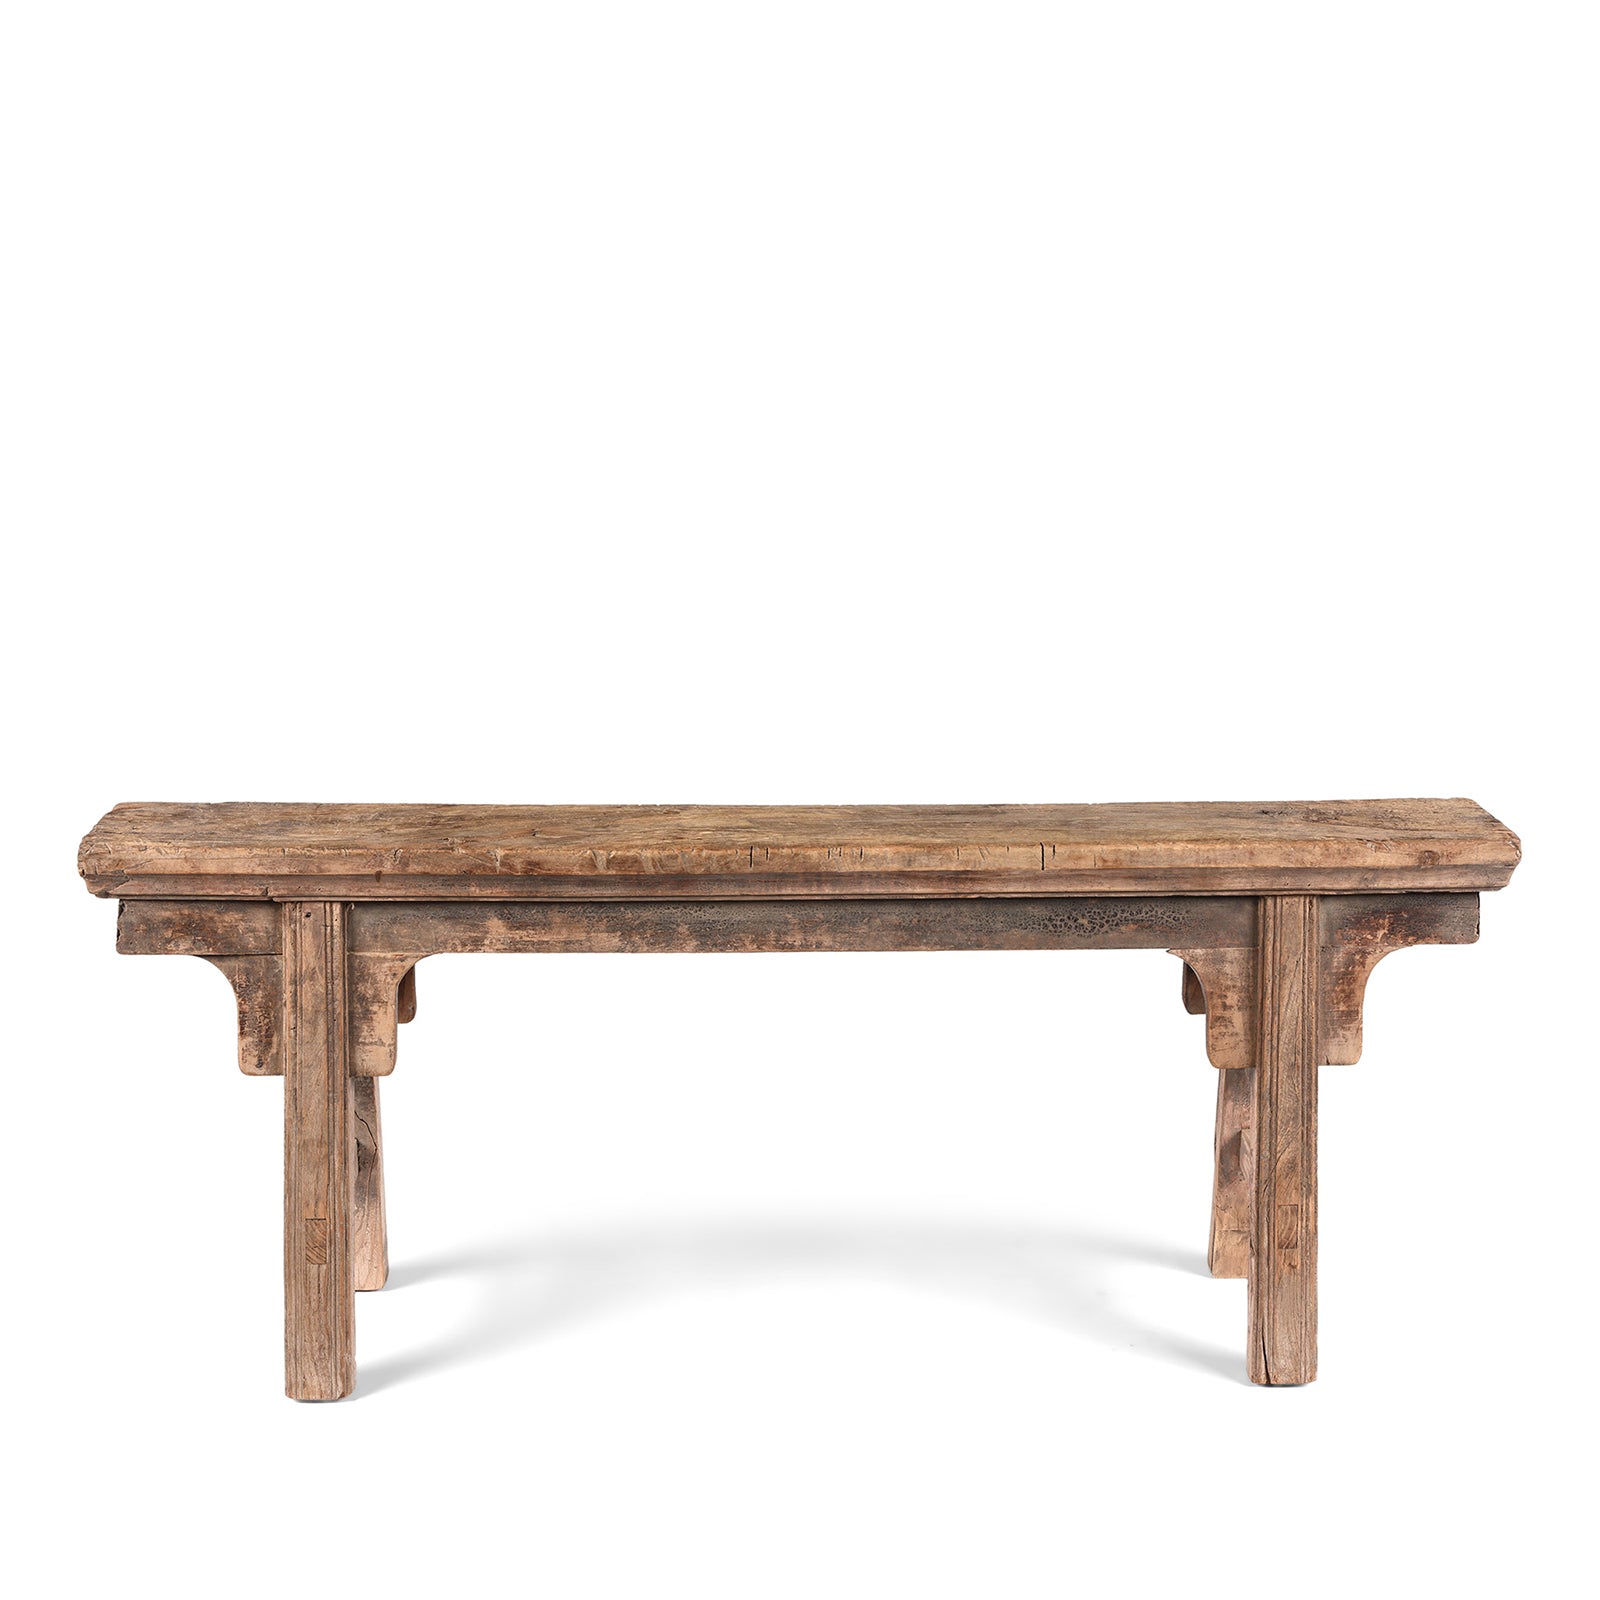 Antique Elm Chinese Spring Bench From Shanxi Province | Indigo Antiques